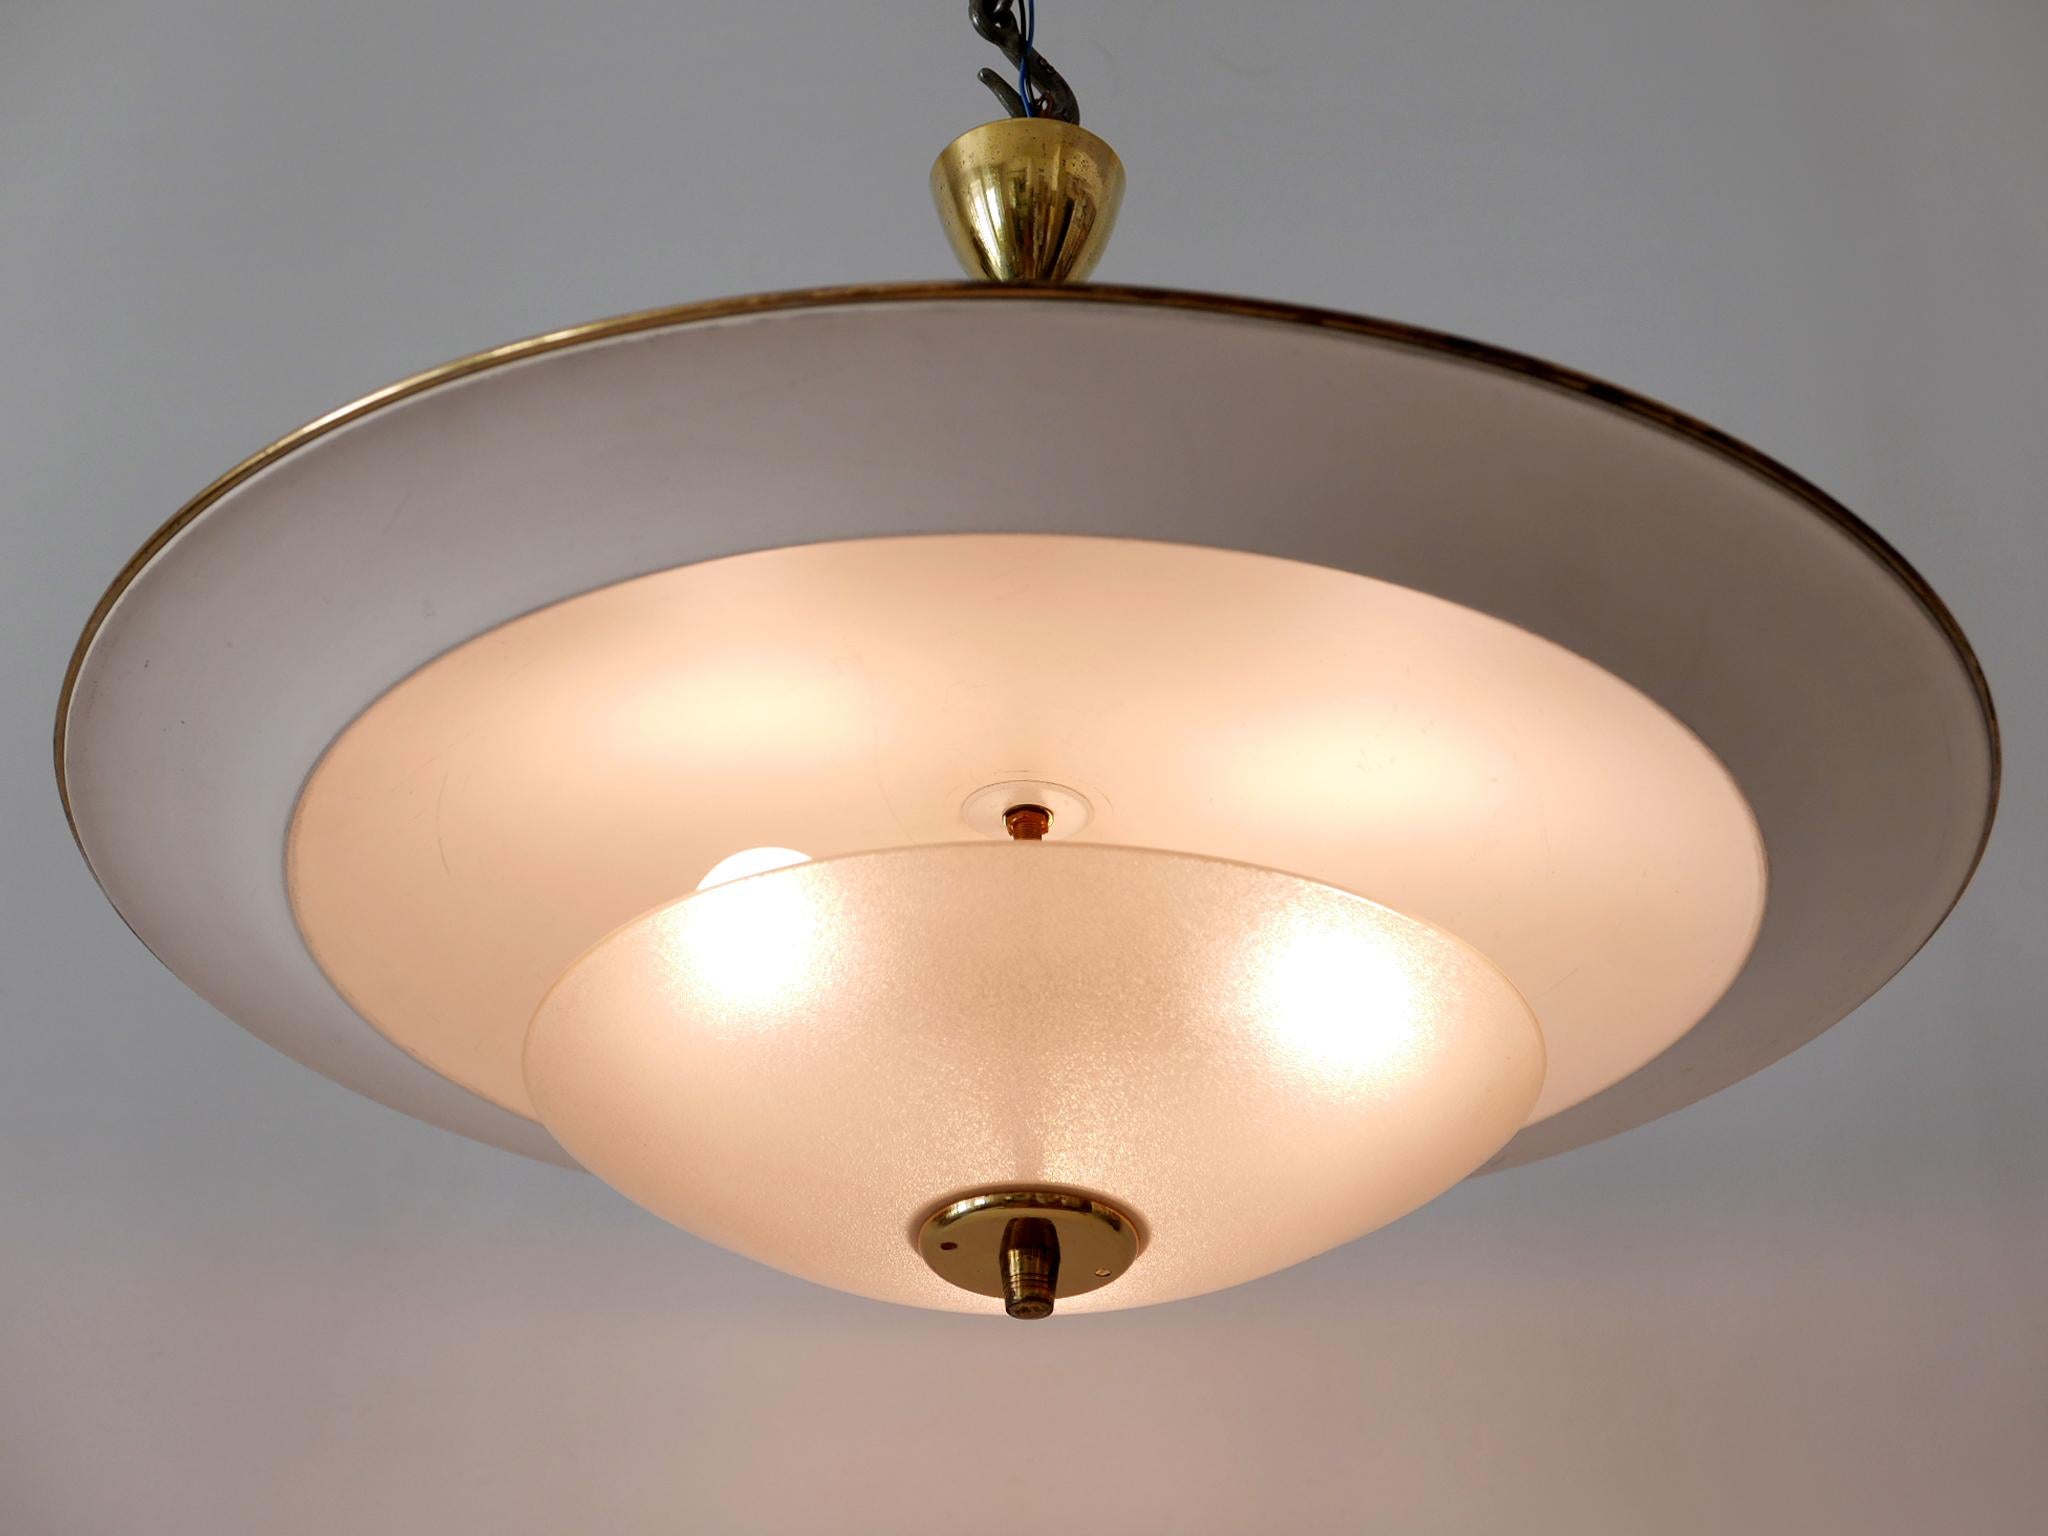 Large Mid-Century Modern 'Ufo' Ceiling Light or Pendant Lamp Germany 1950s № 1 For Sale 8